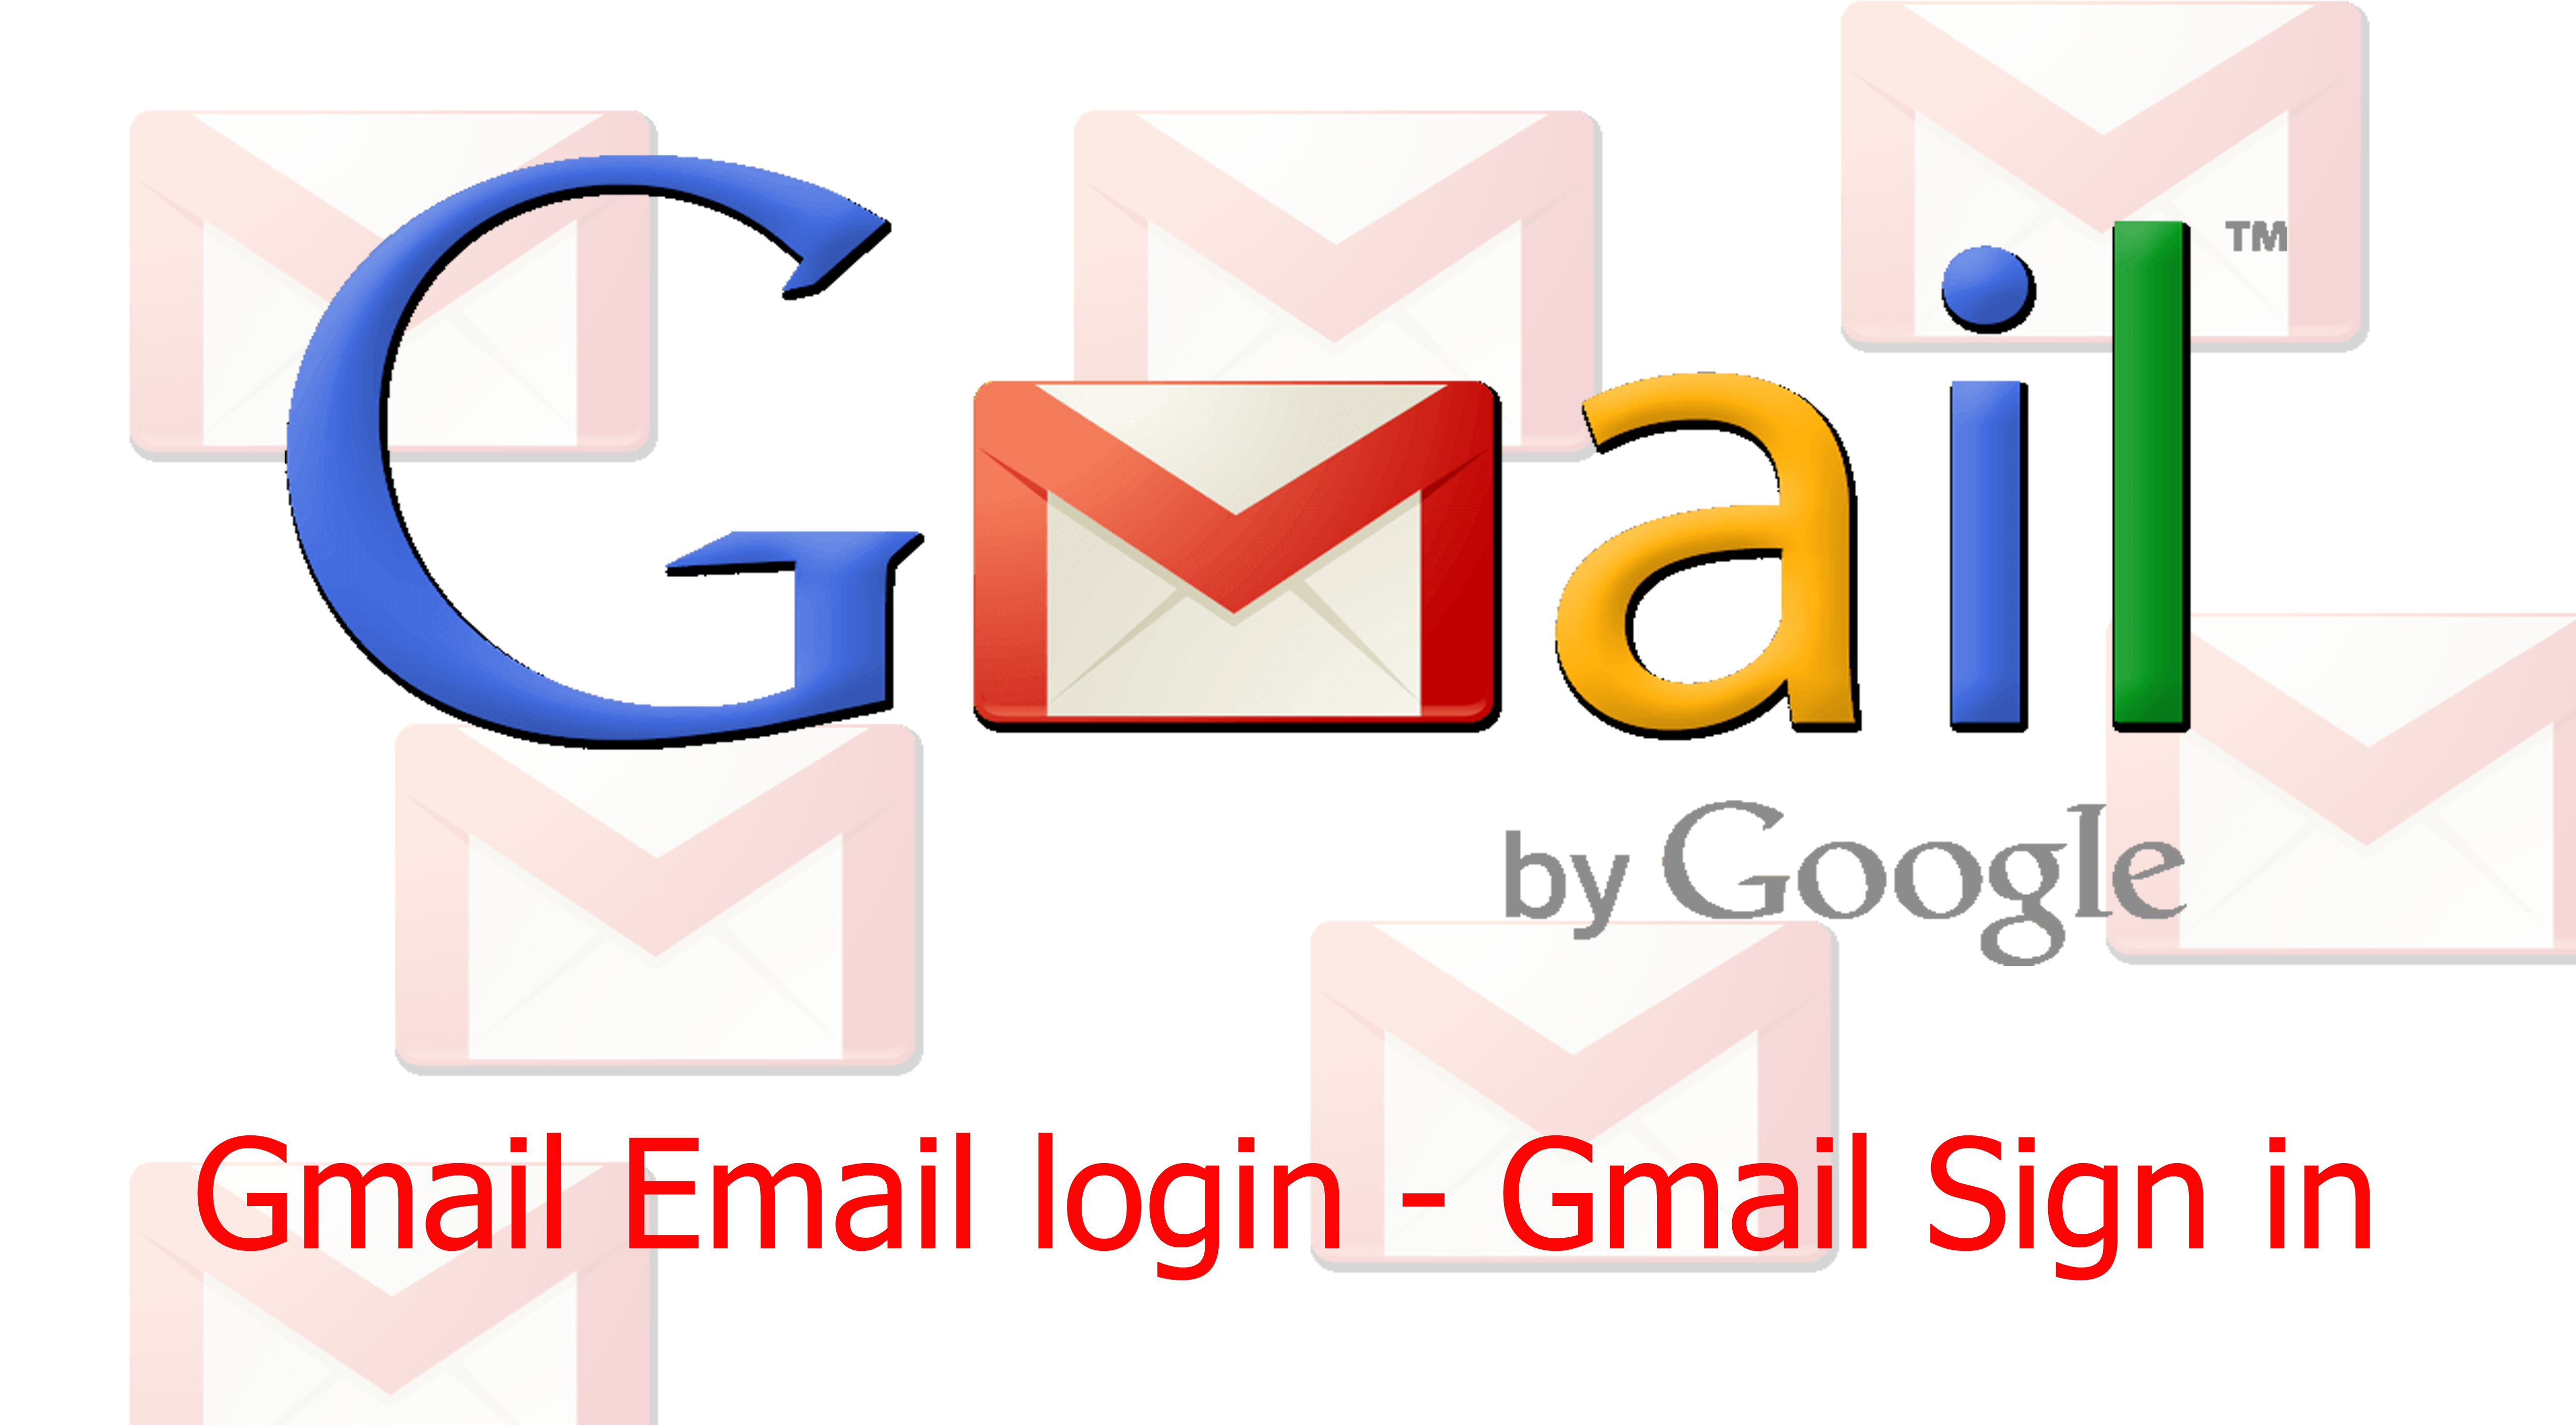 Gmail Email login